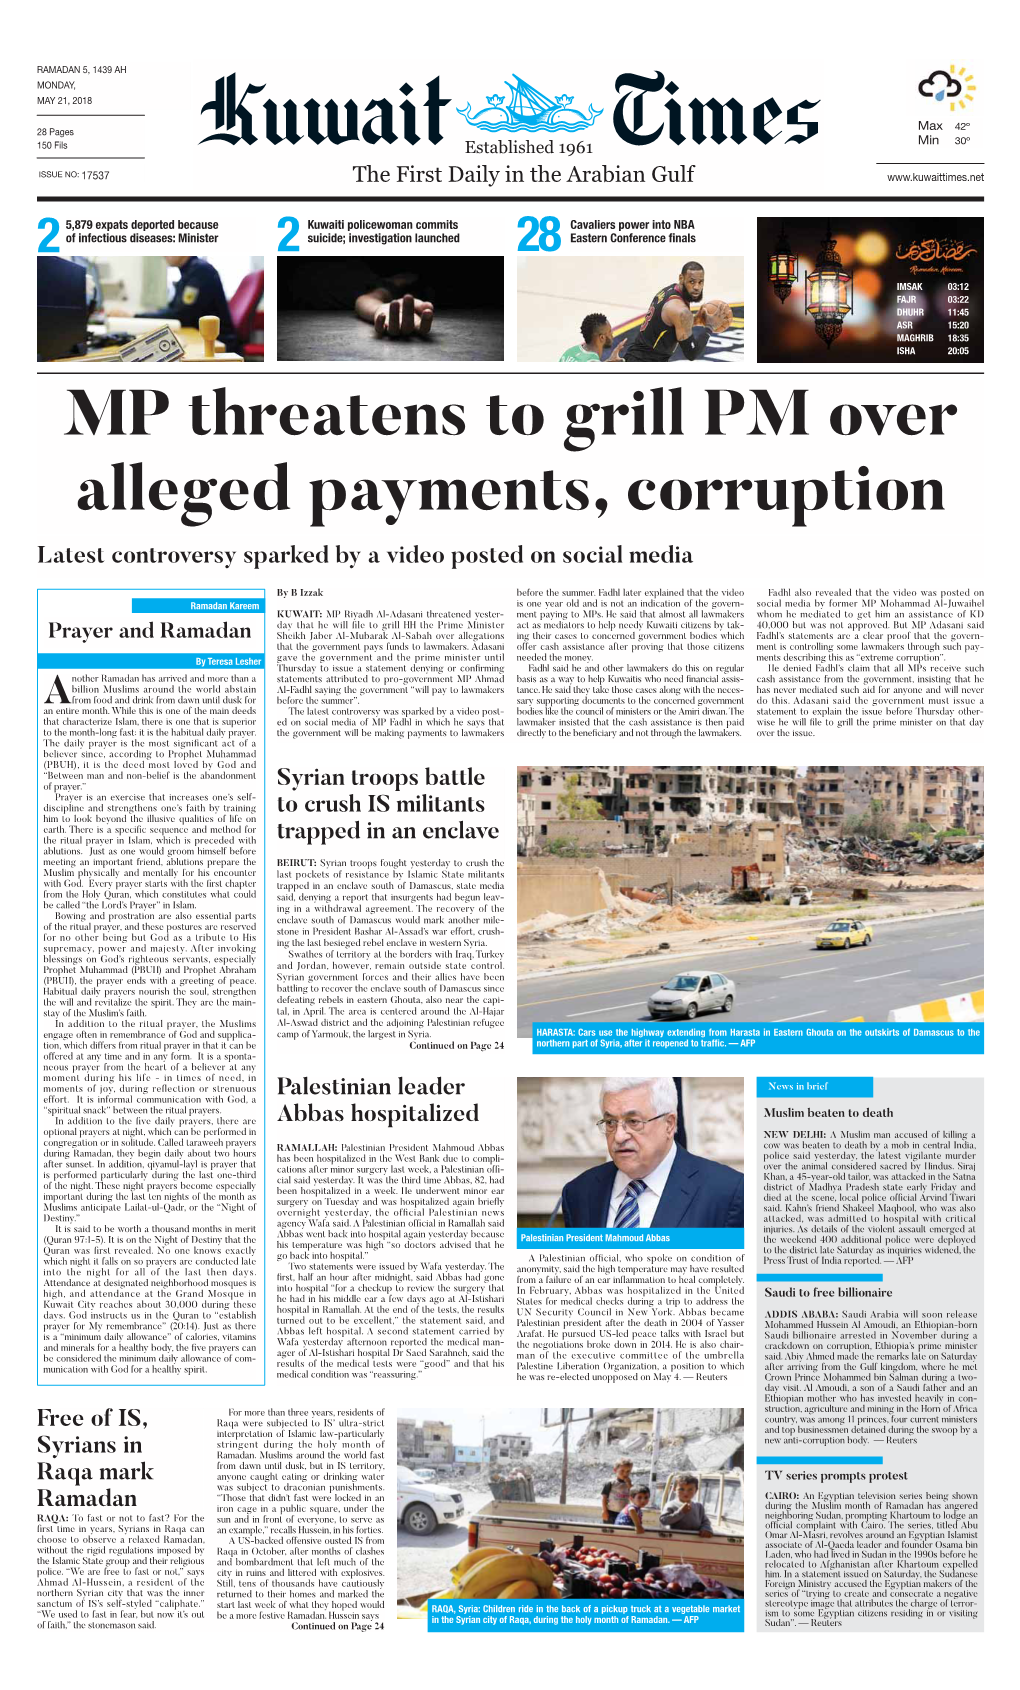 MP Threatens to Grill PM Over Alleged Payments, Corruption Latest Controversy Sparked by a Video Posted on Social Media